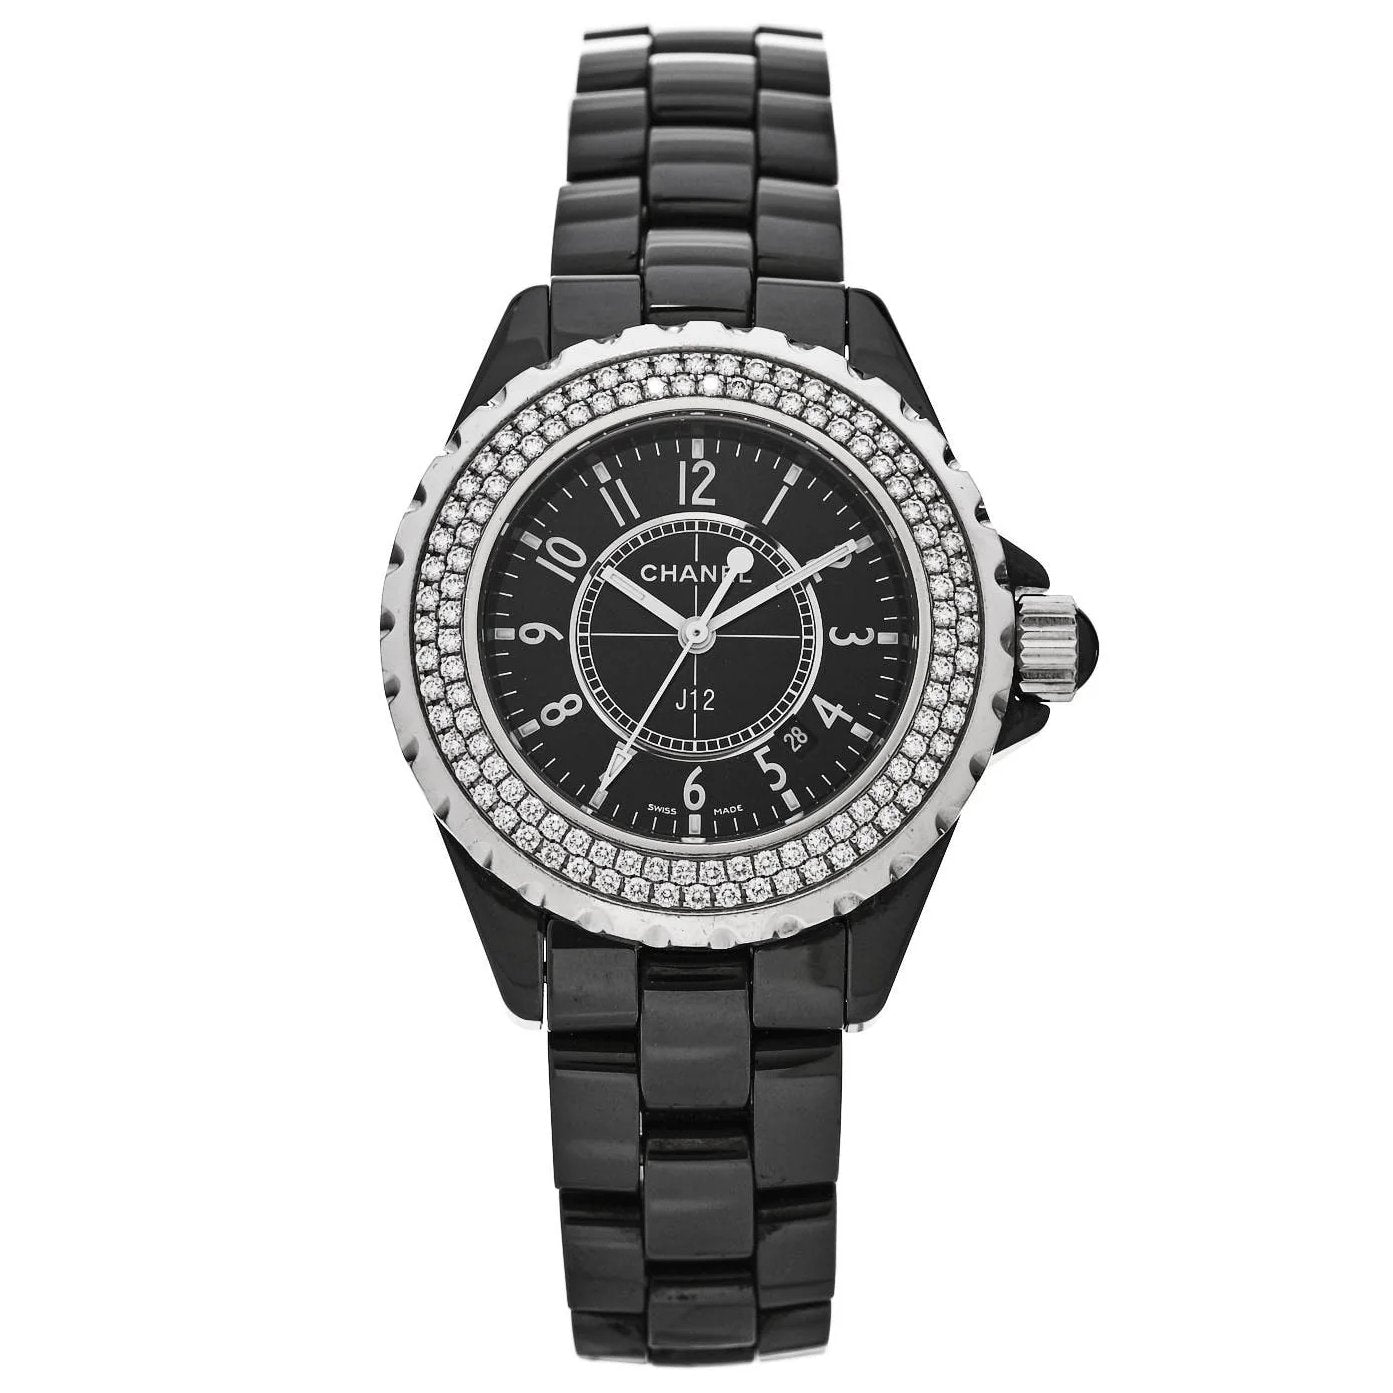 Ladies Chanel J12 - 33mm Black Ceramic Band Watch with High Precision Quartz Movement and Diamond Bezel. (Pre-Owned J12)